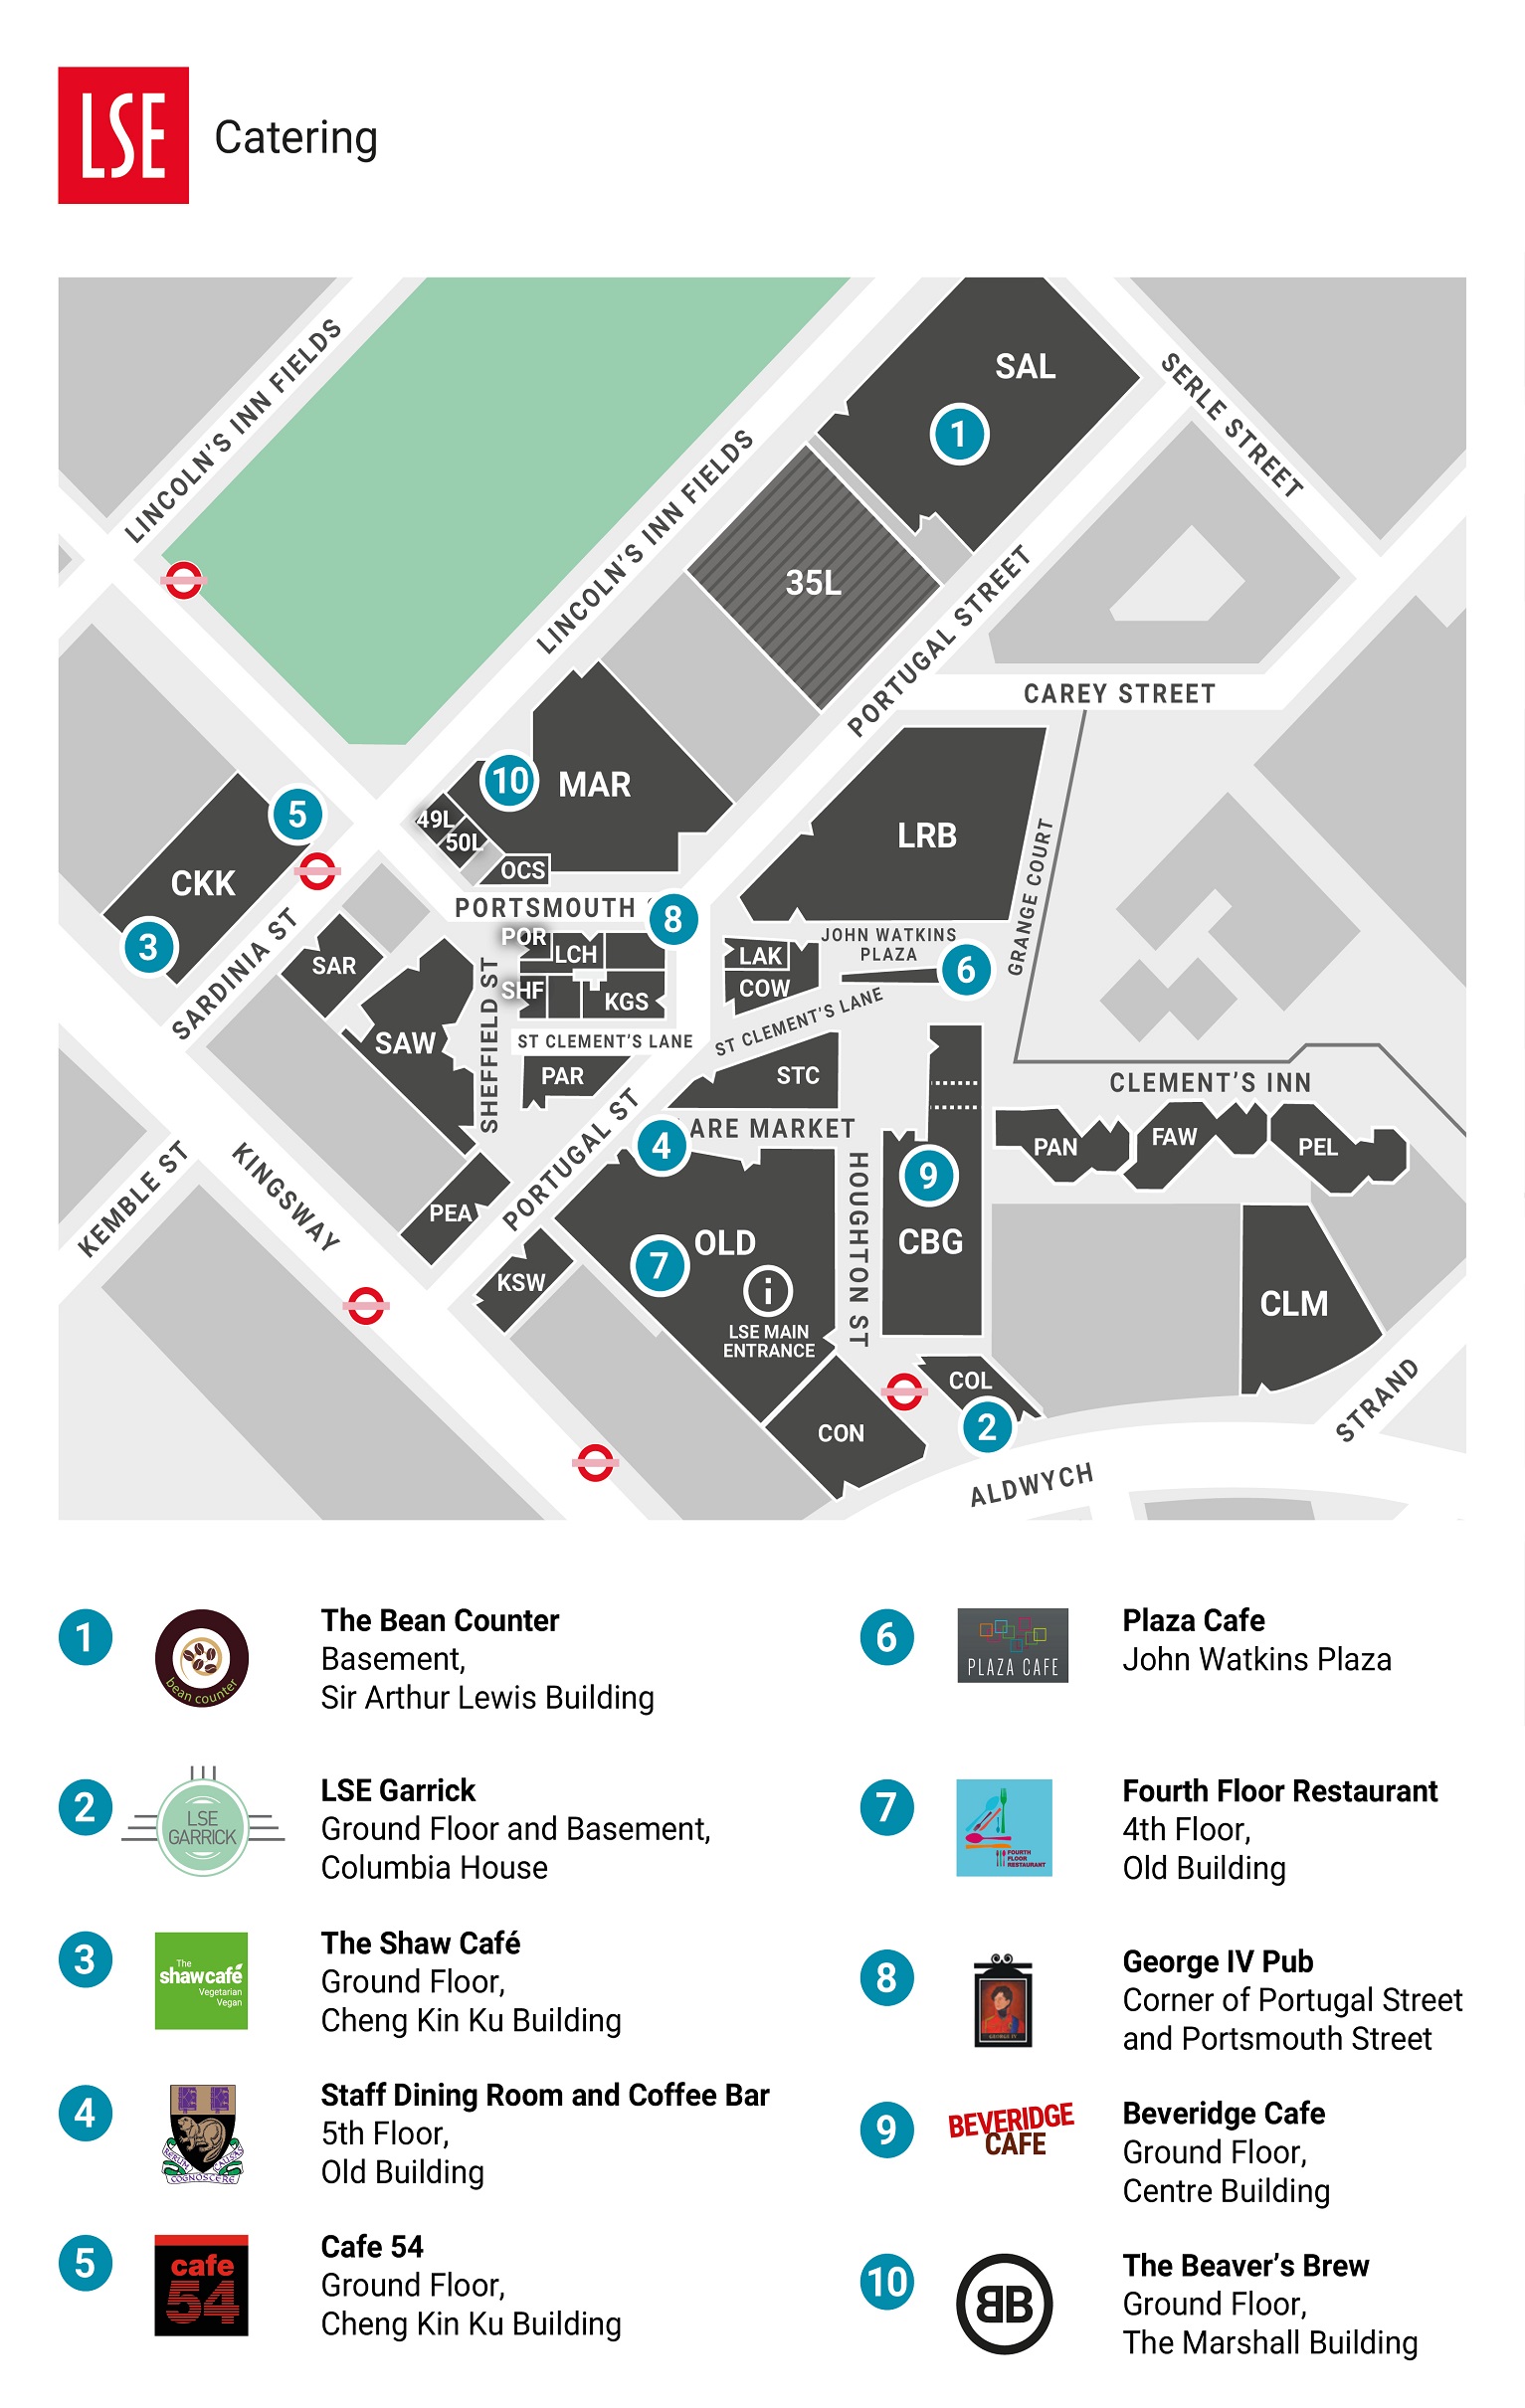 lse-catering-new-map